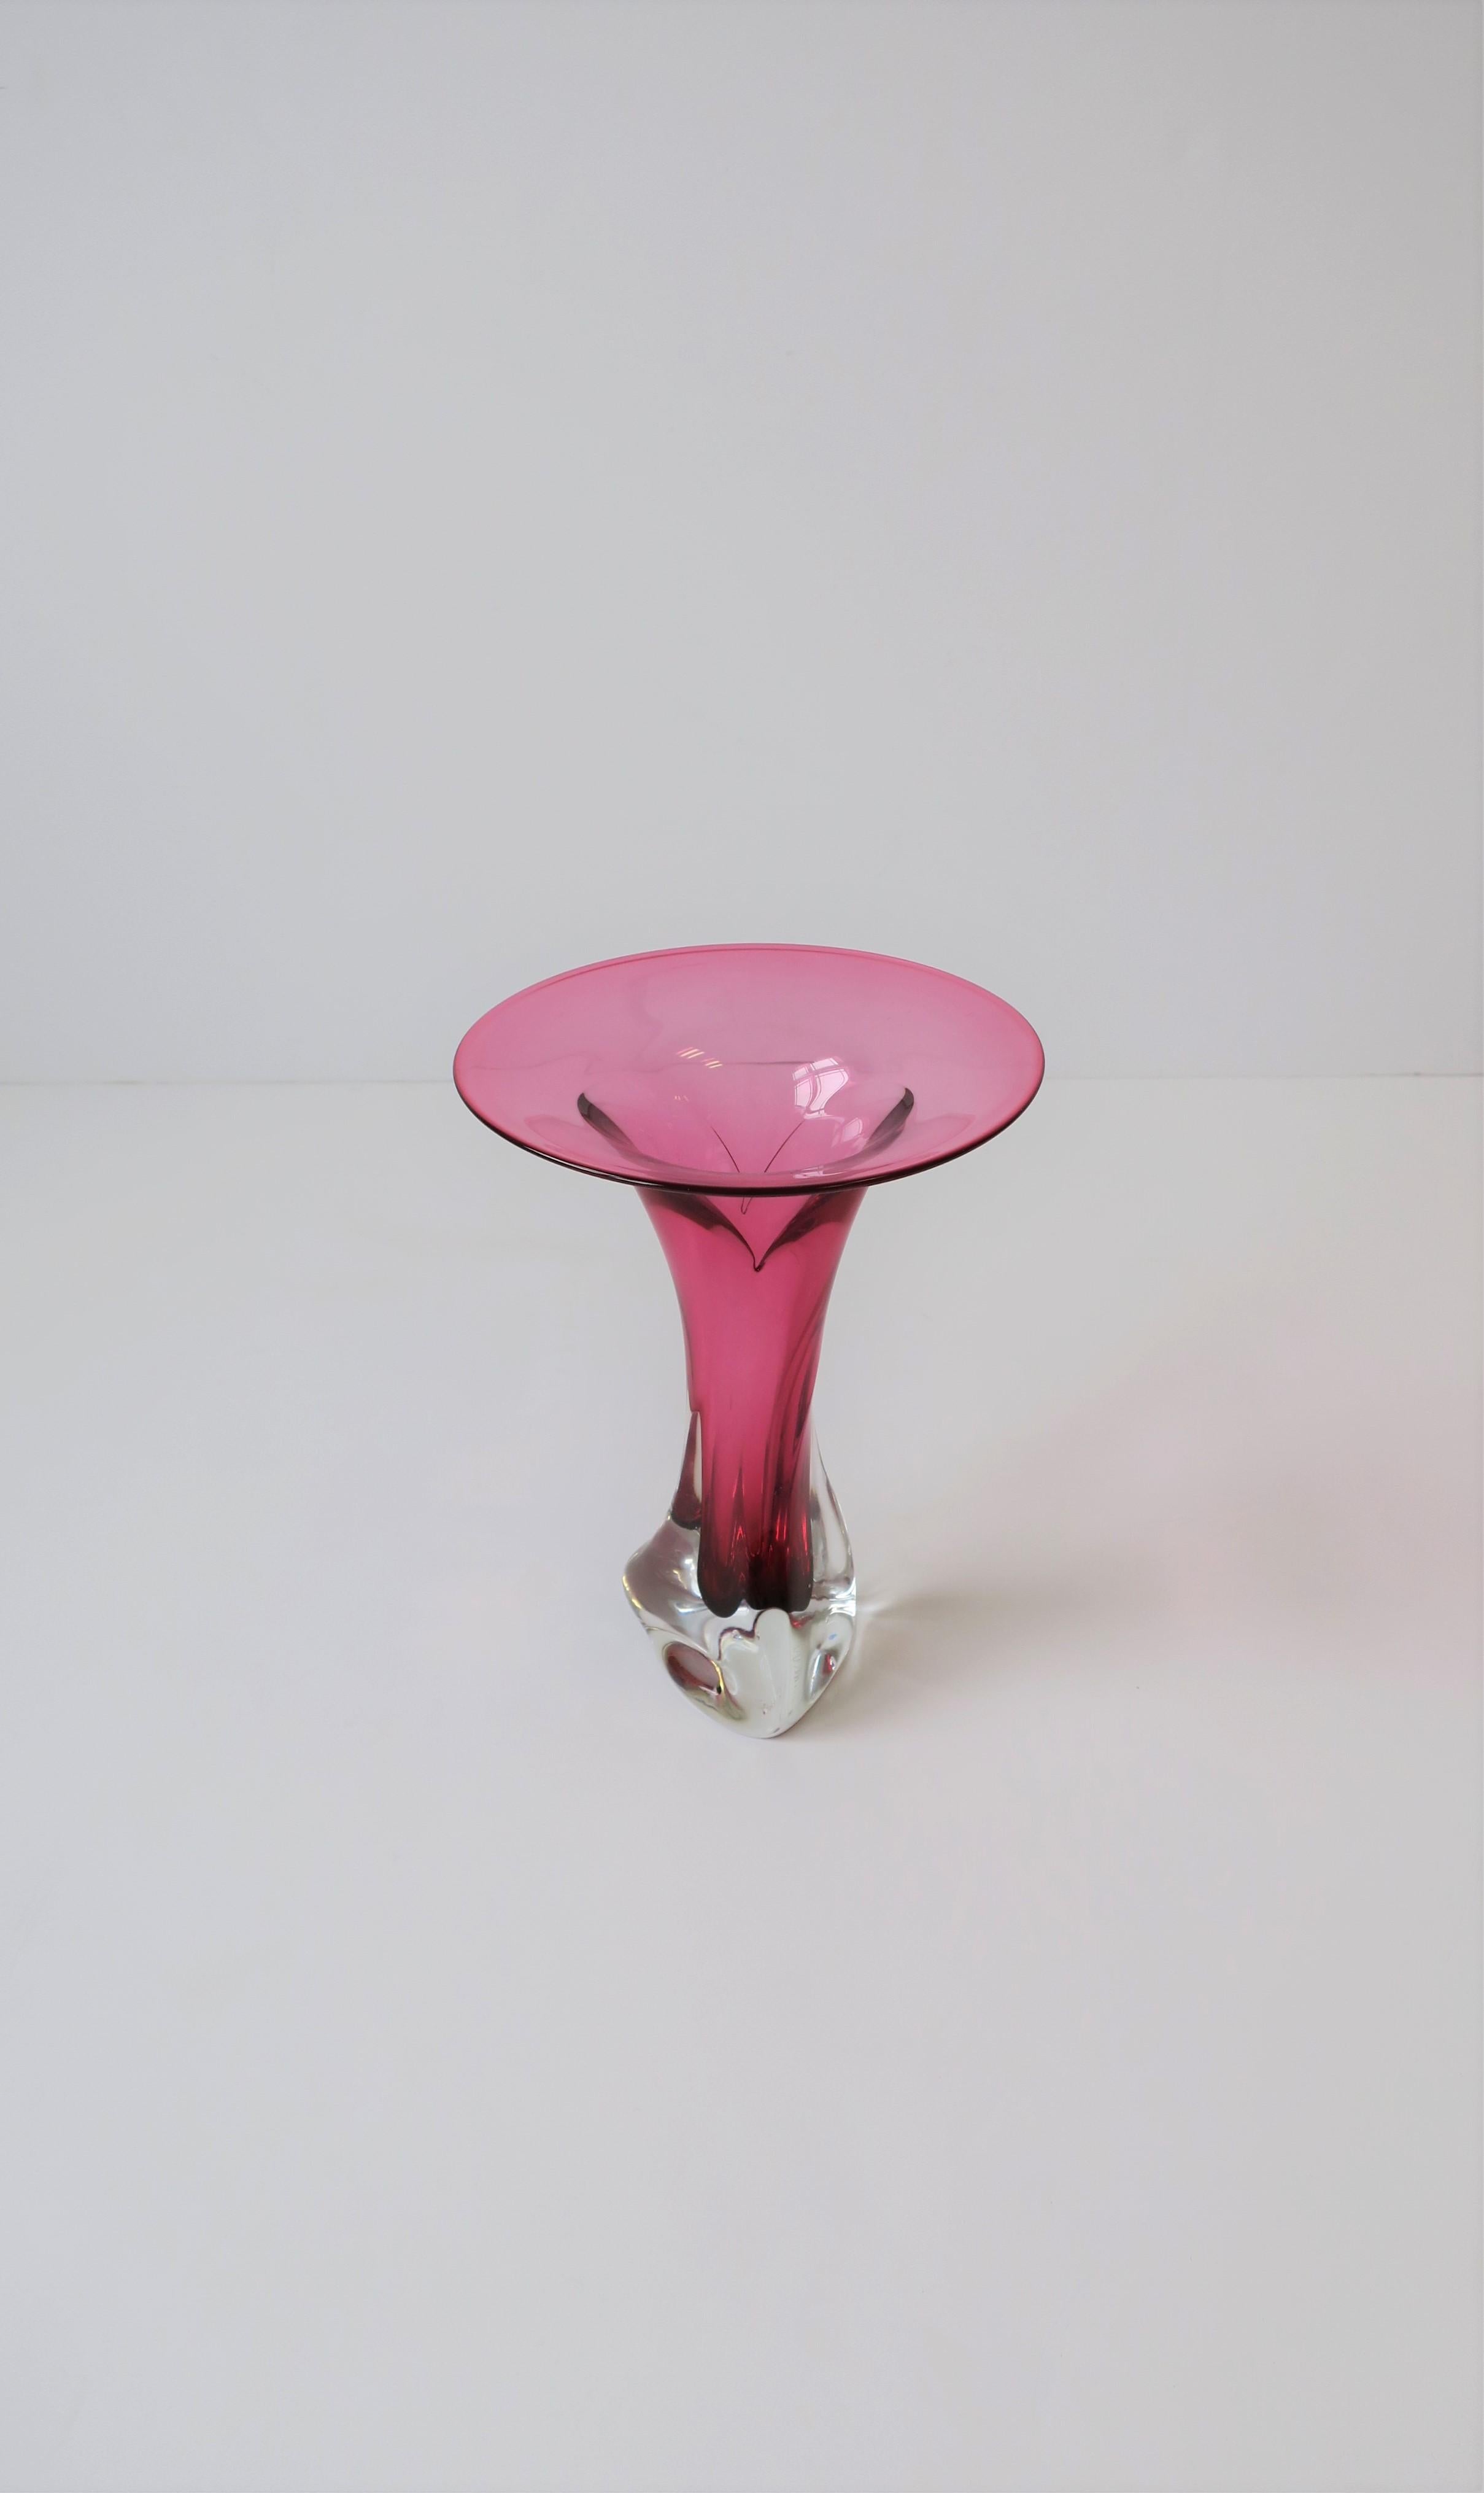 Late 20th Century Hot Pink and Clear Signed Art Glass Vase, ca. 1990s